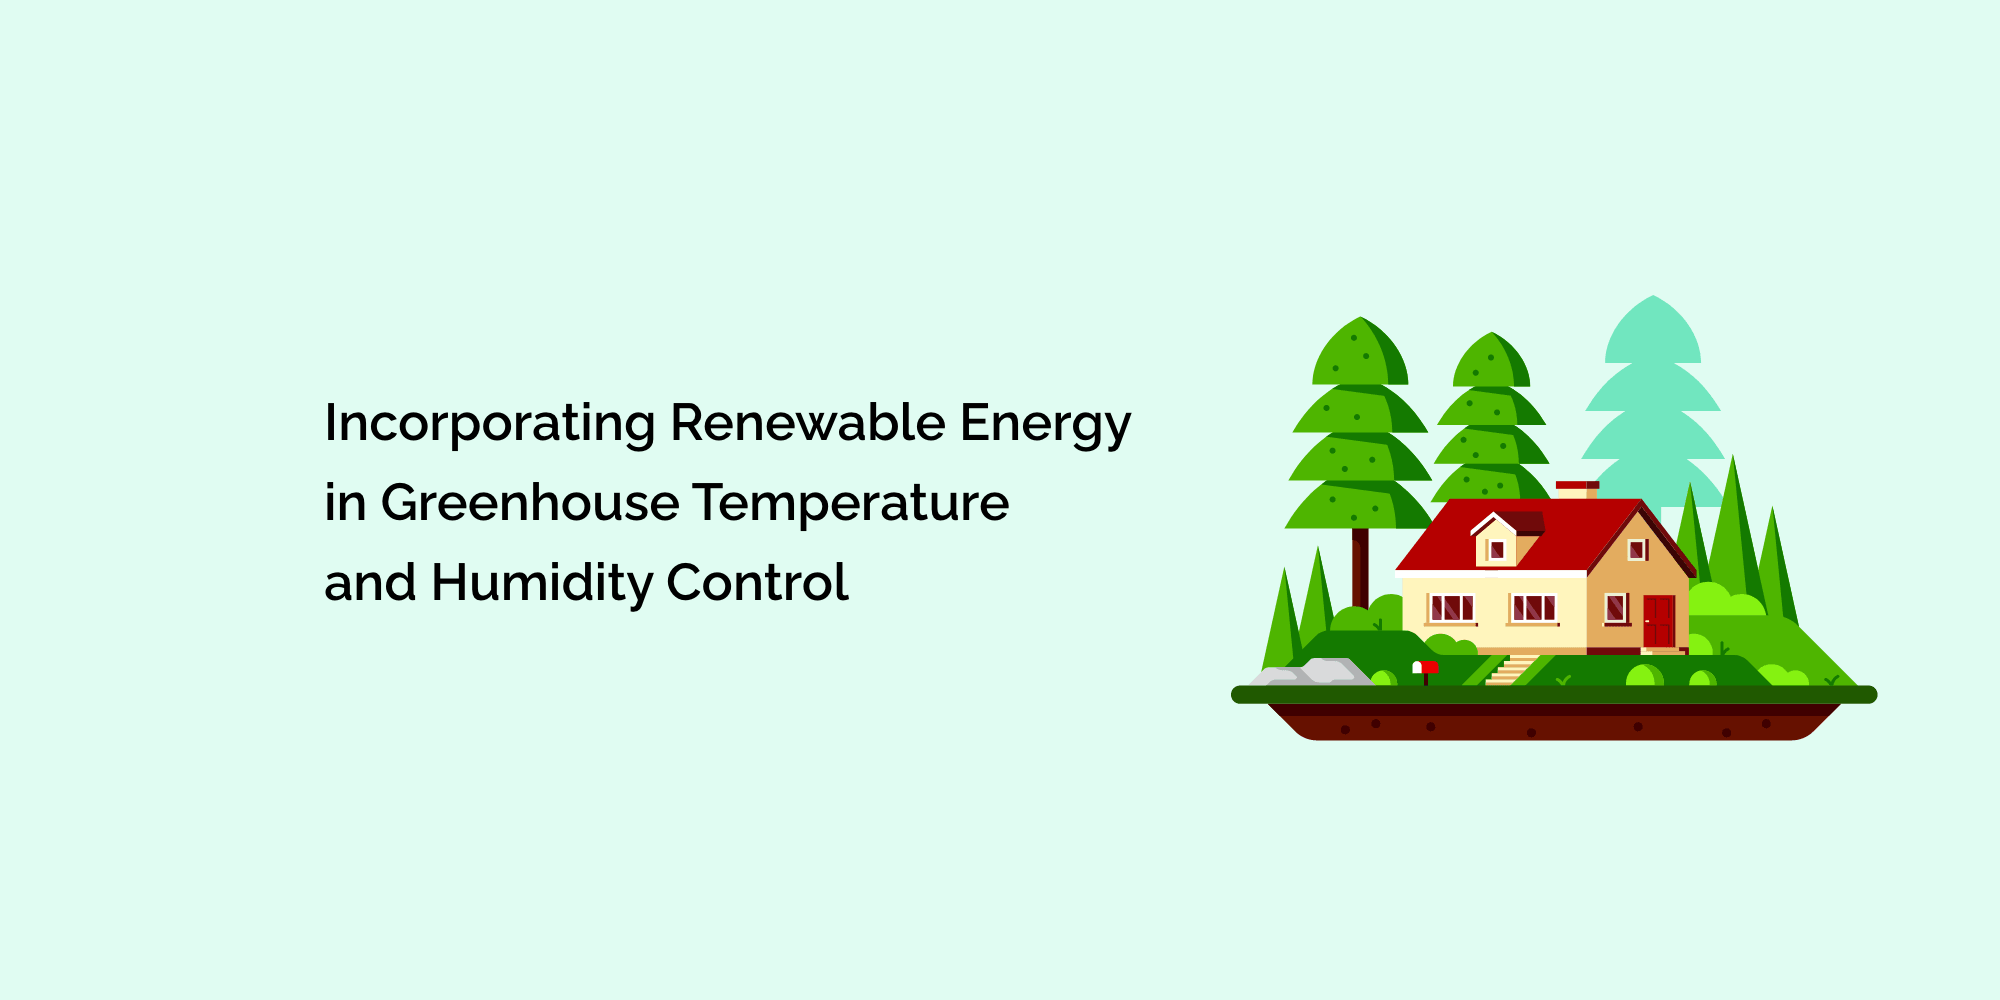 Incorporating Renewable Energy in Greenhouse Temperature and Humidity Control